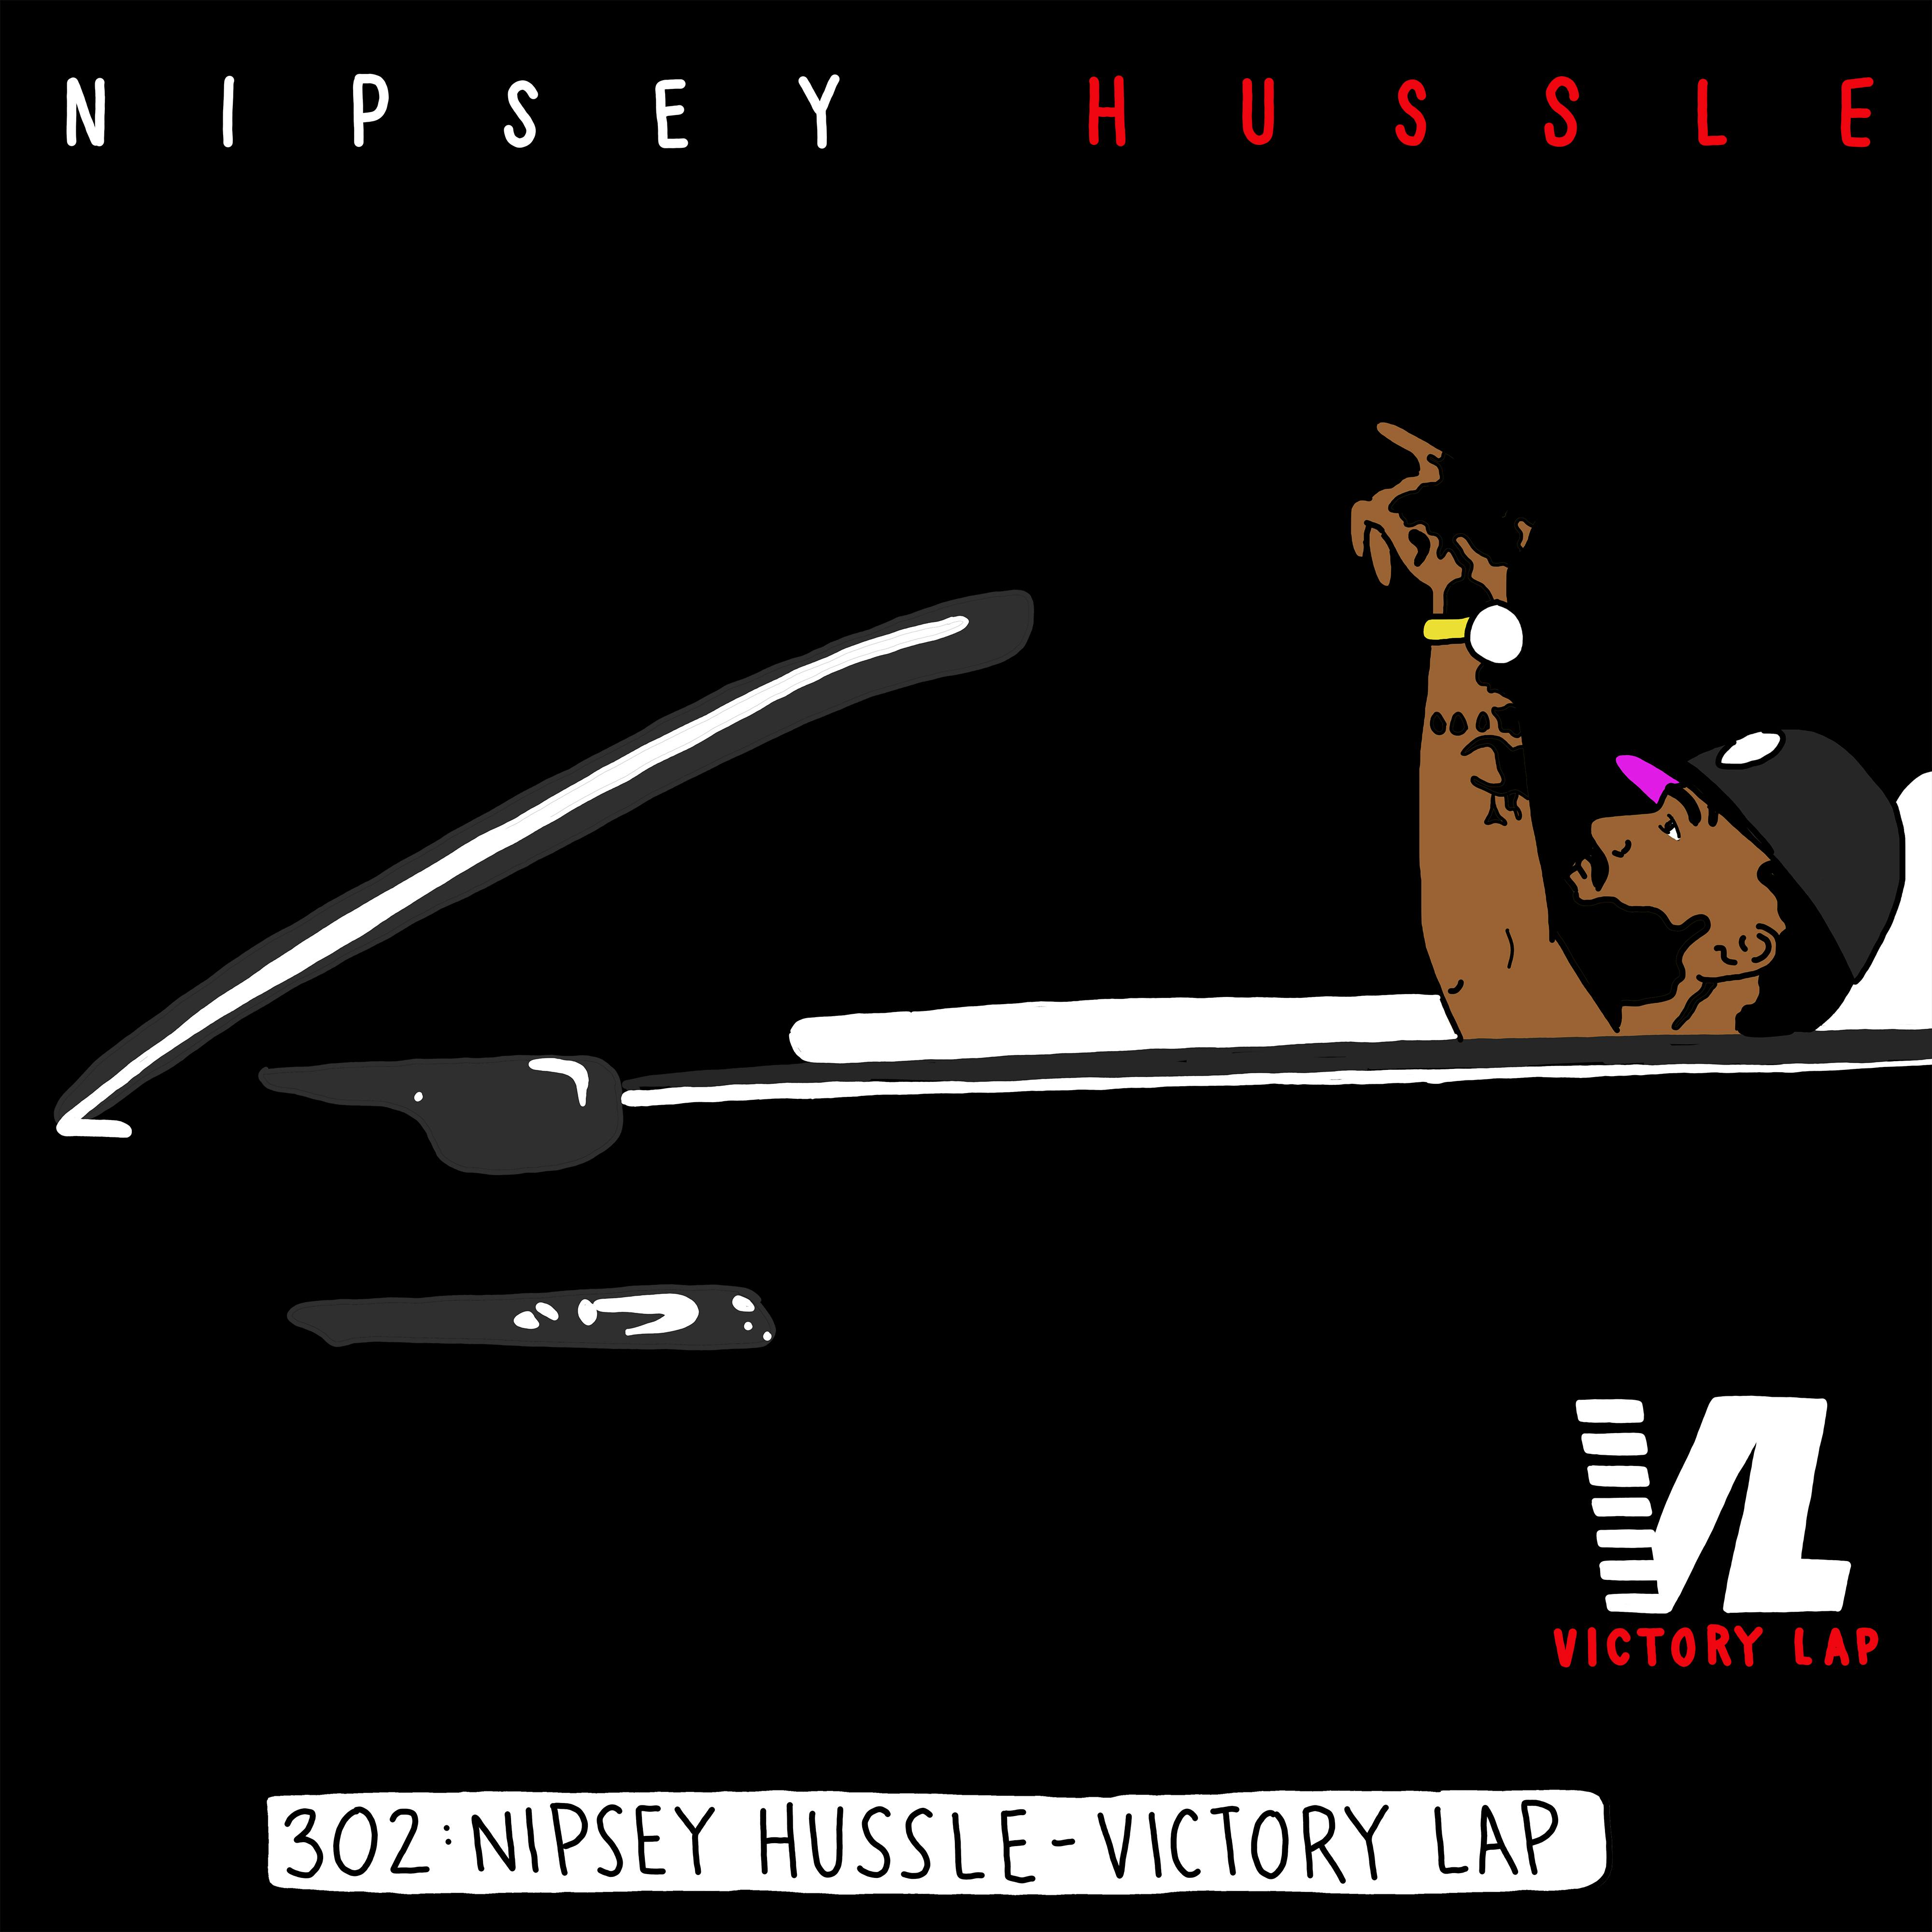 Five years later, the legacy of Nipsey Hussle's 